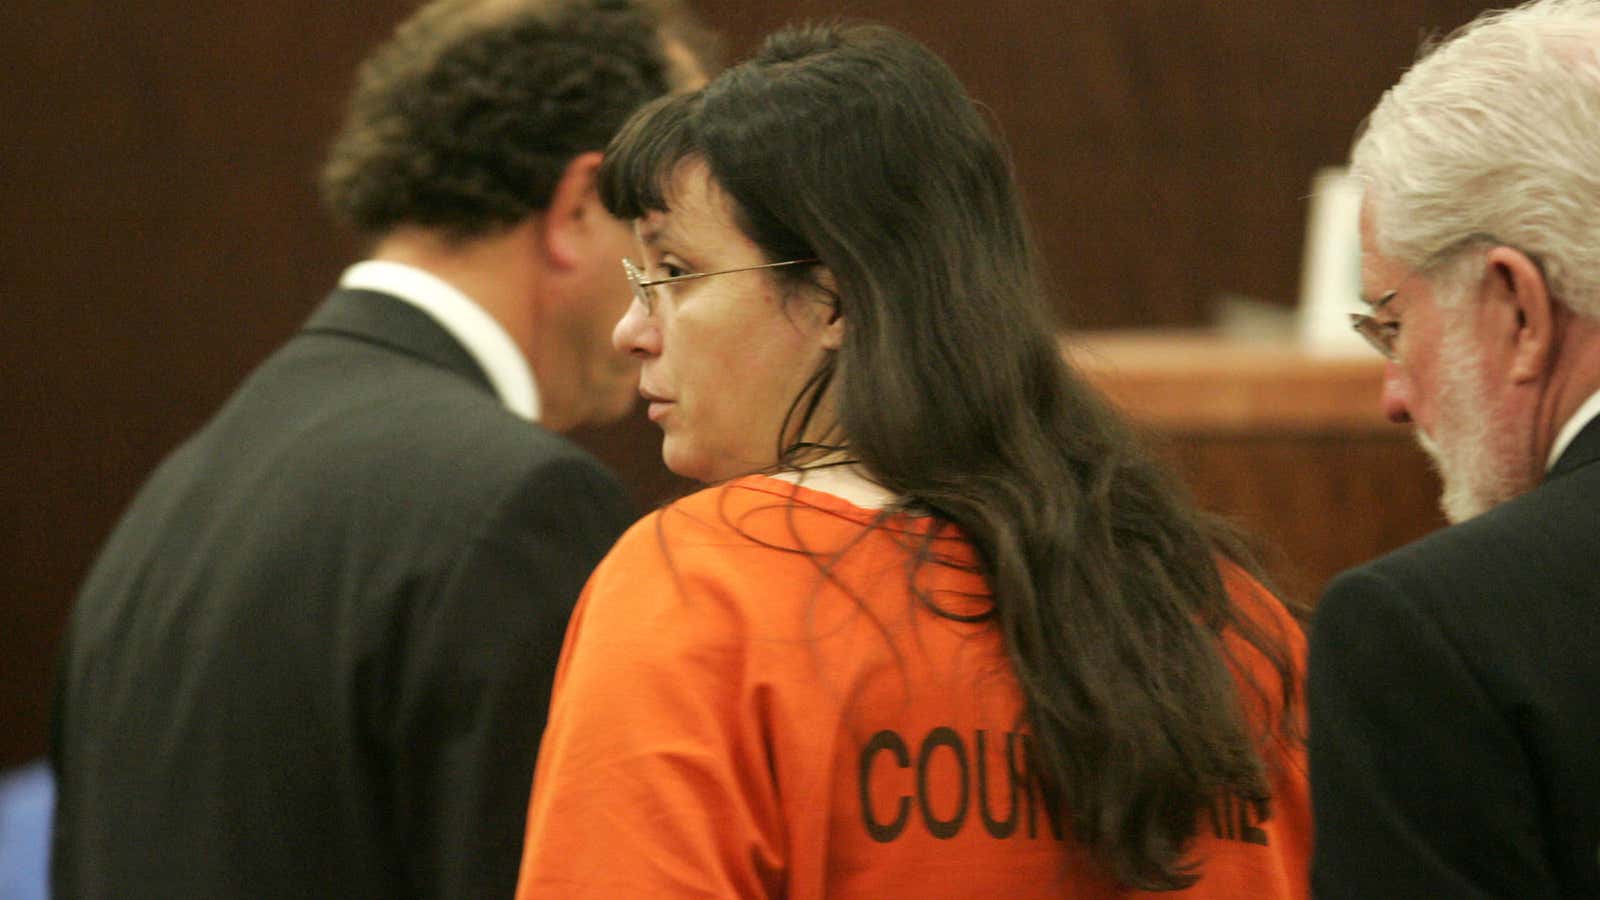 Andrea Yates, who drowned her five children, was found not guilty by reason of insanity.